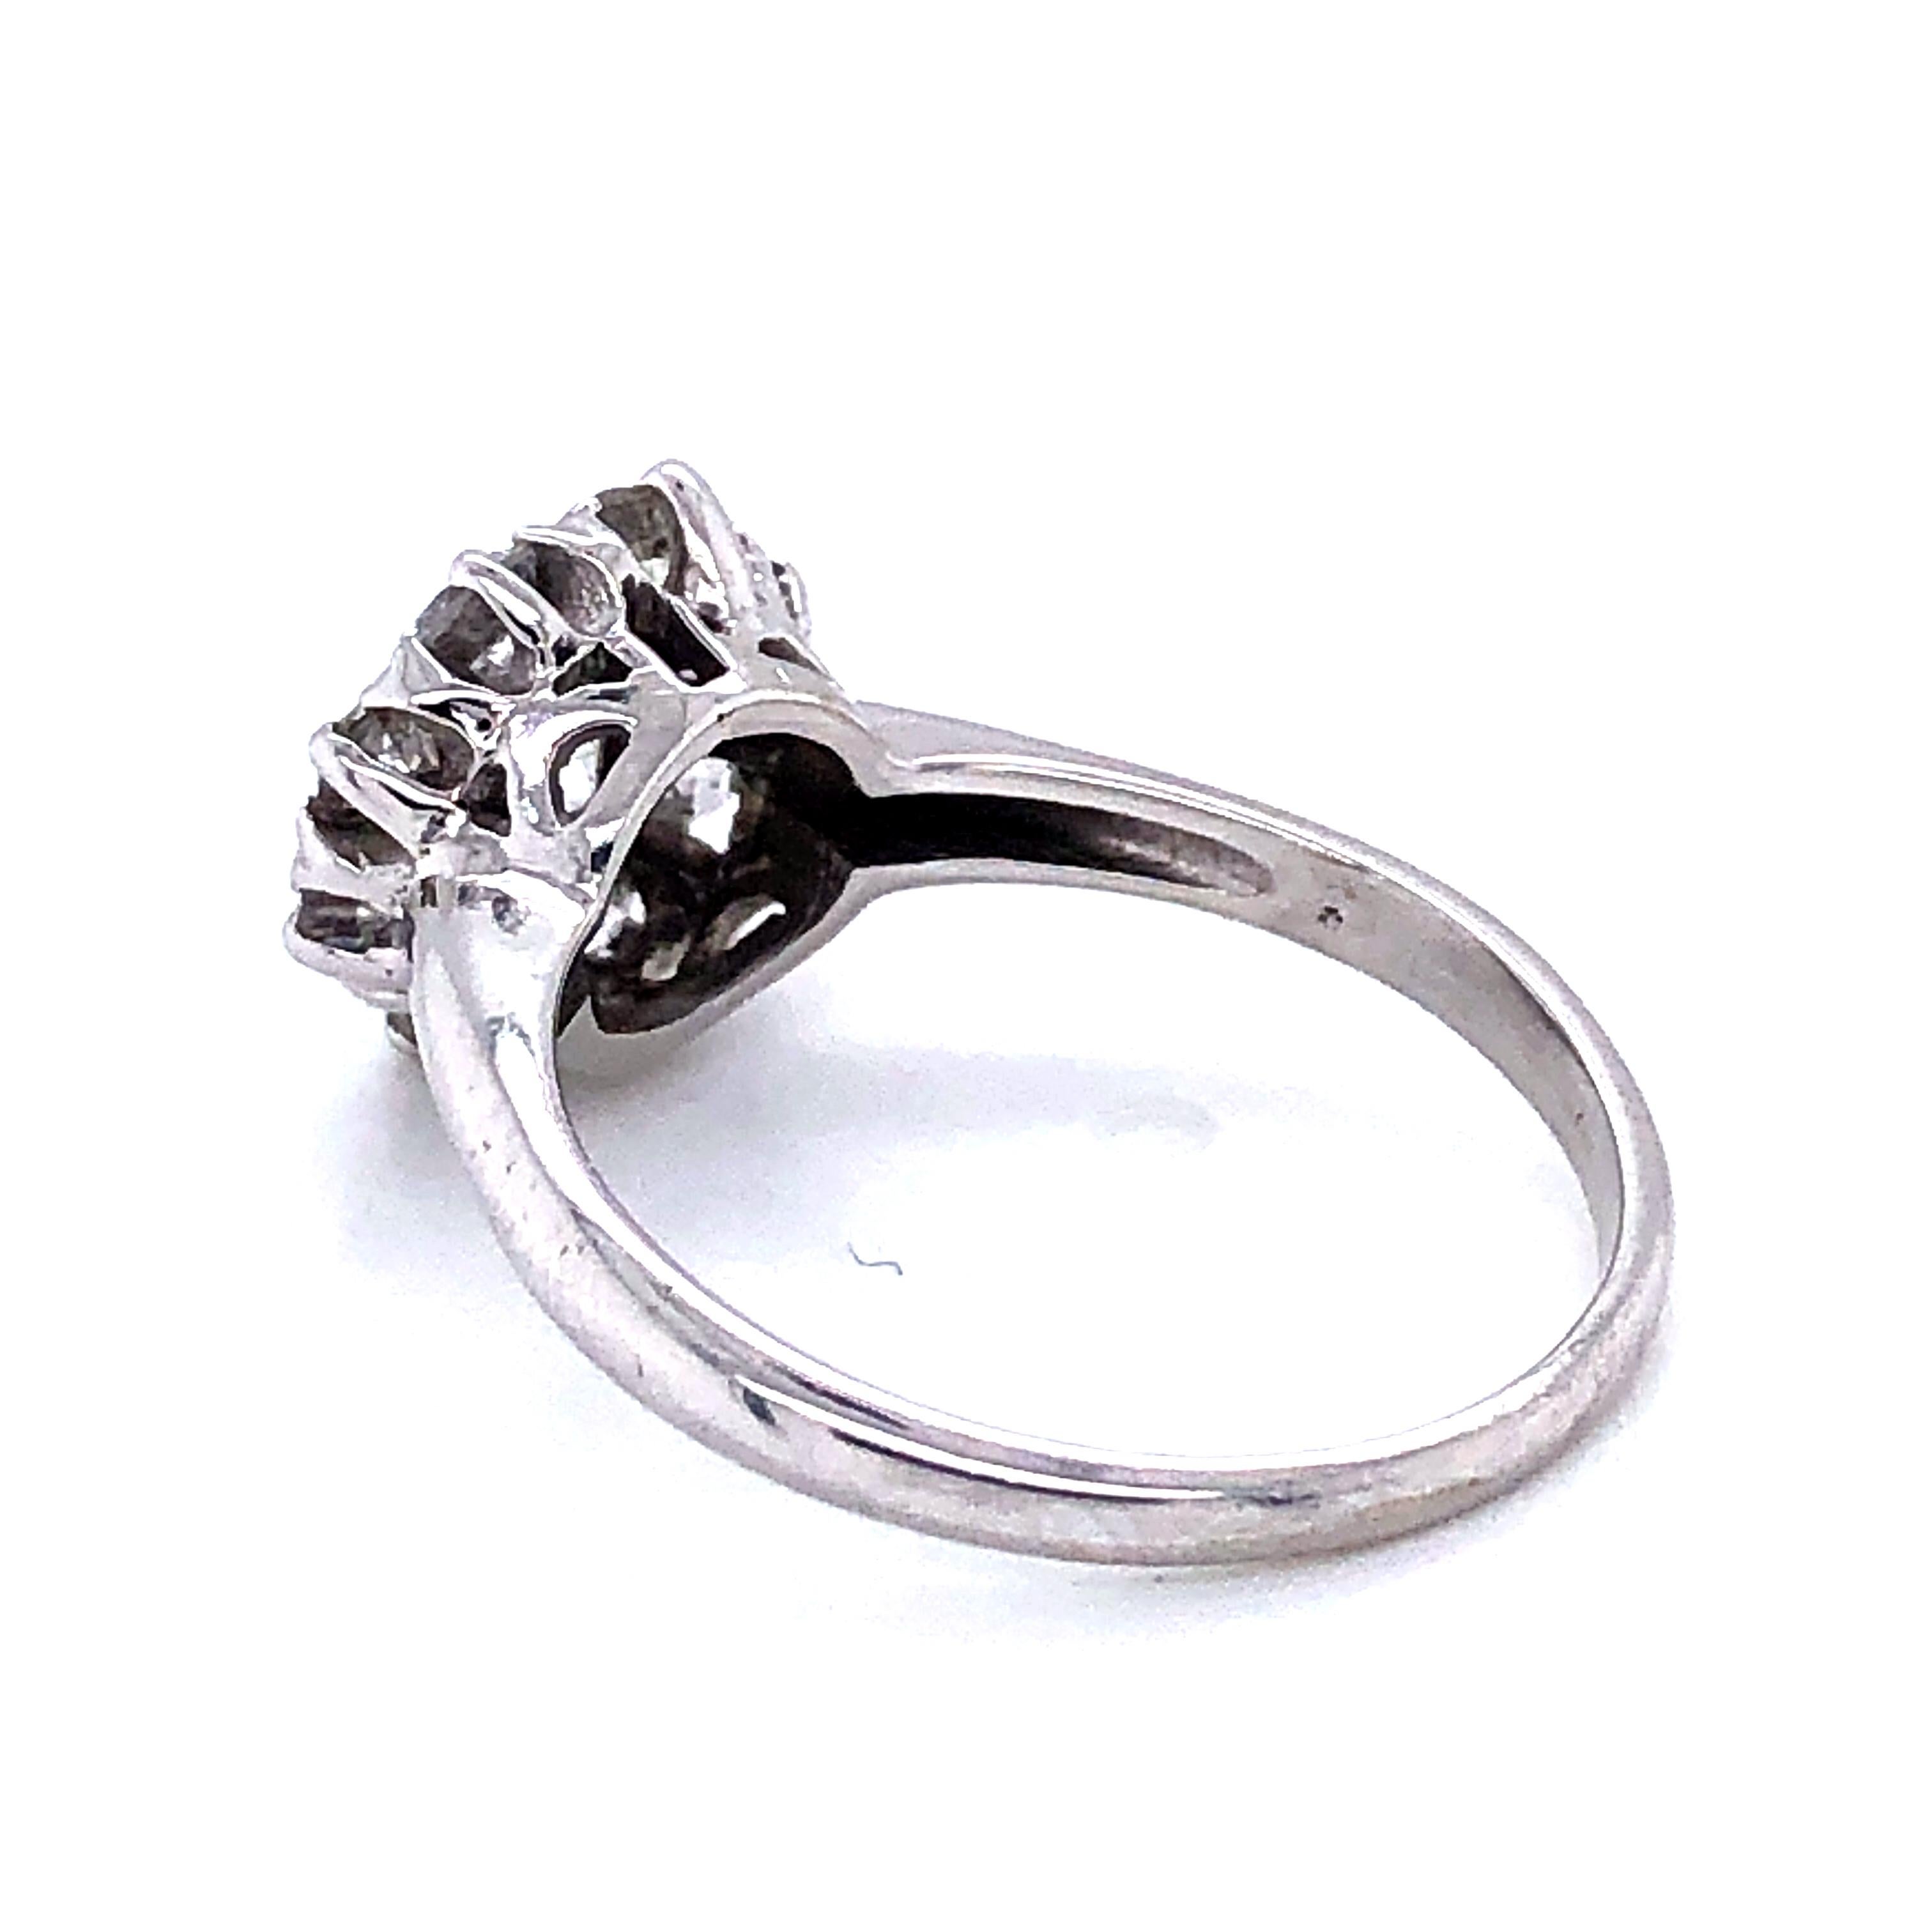 One 14 karat white gold engagement ring featuring one prong set Old Mine cut diamond, approximately 0.33 carat total weight with I/J color and SI clarity, surrounded by seven Old Mine cut diamonds and one modern round brilliant diamond,